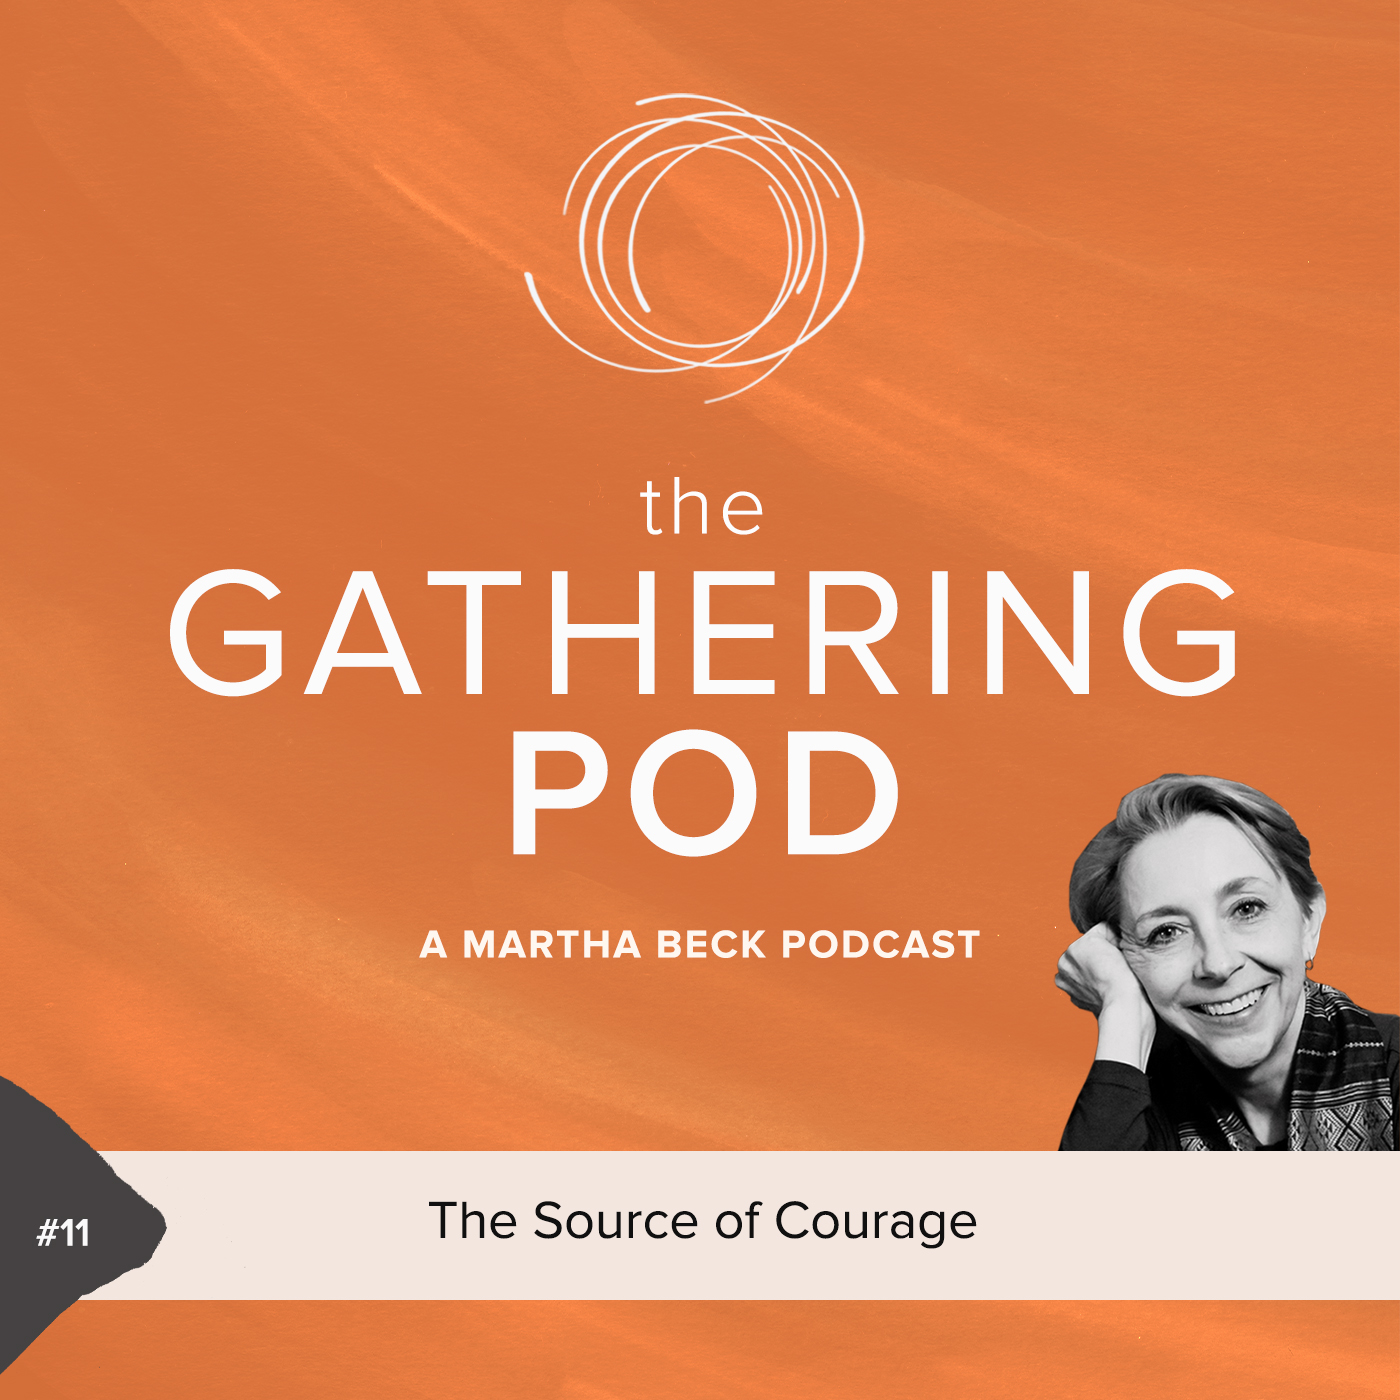 Image for The Gathering Pod A Martha Beck Podcast Episode #11 The Source of Courage